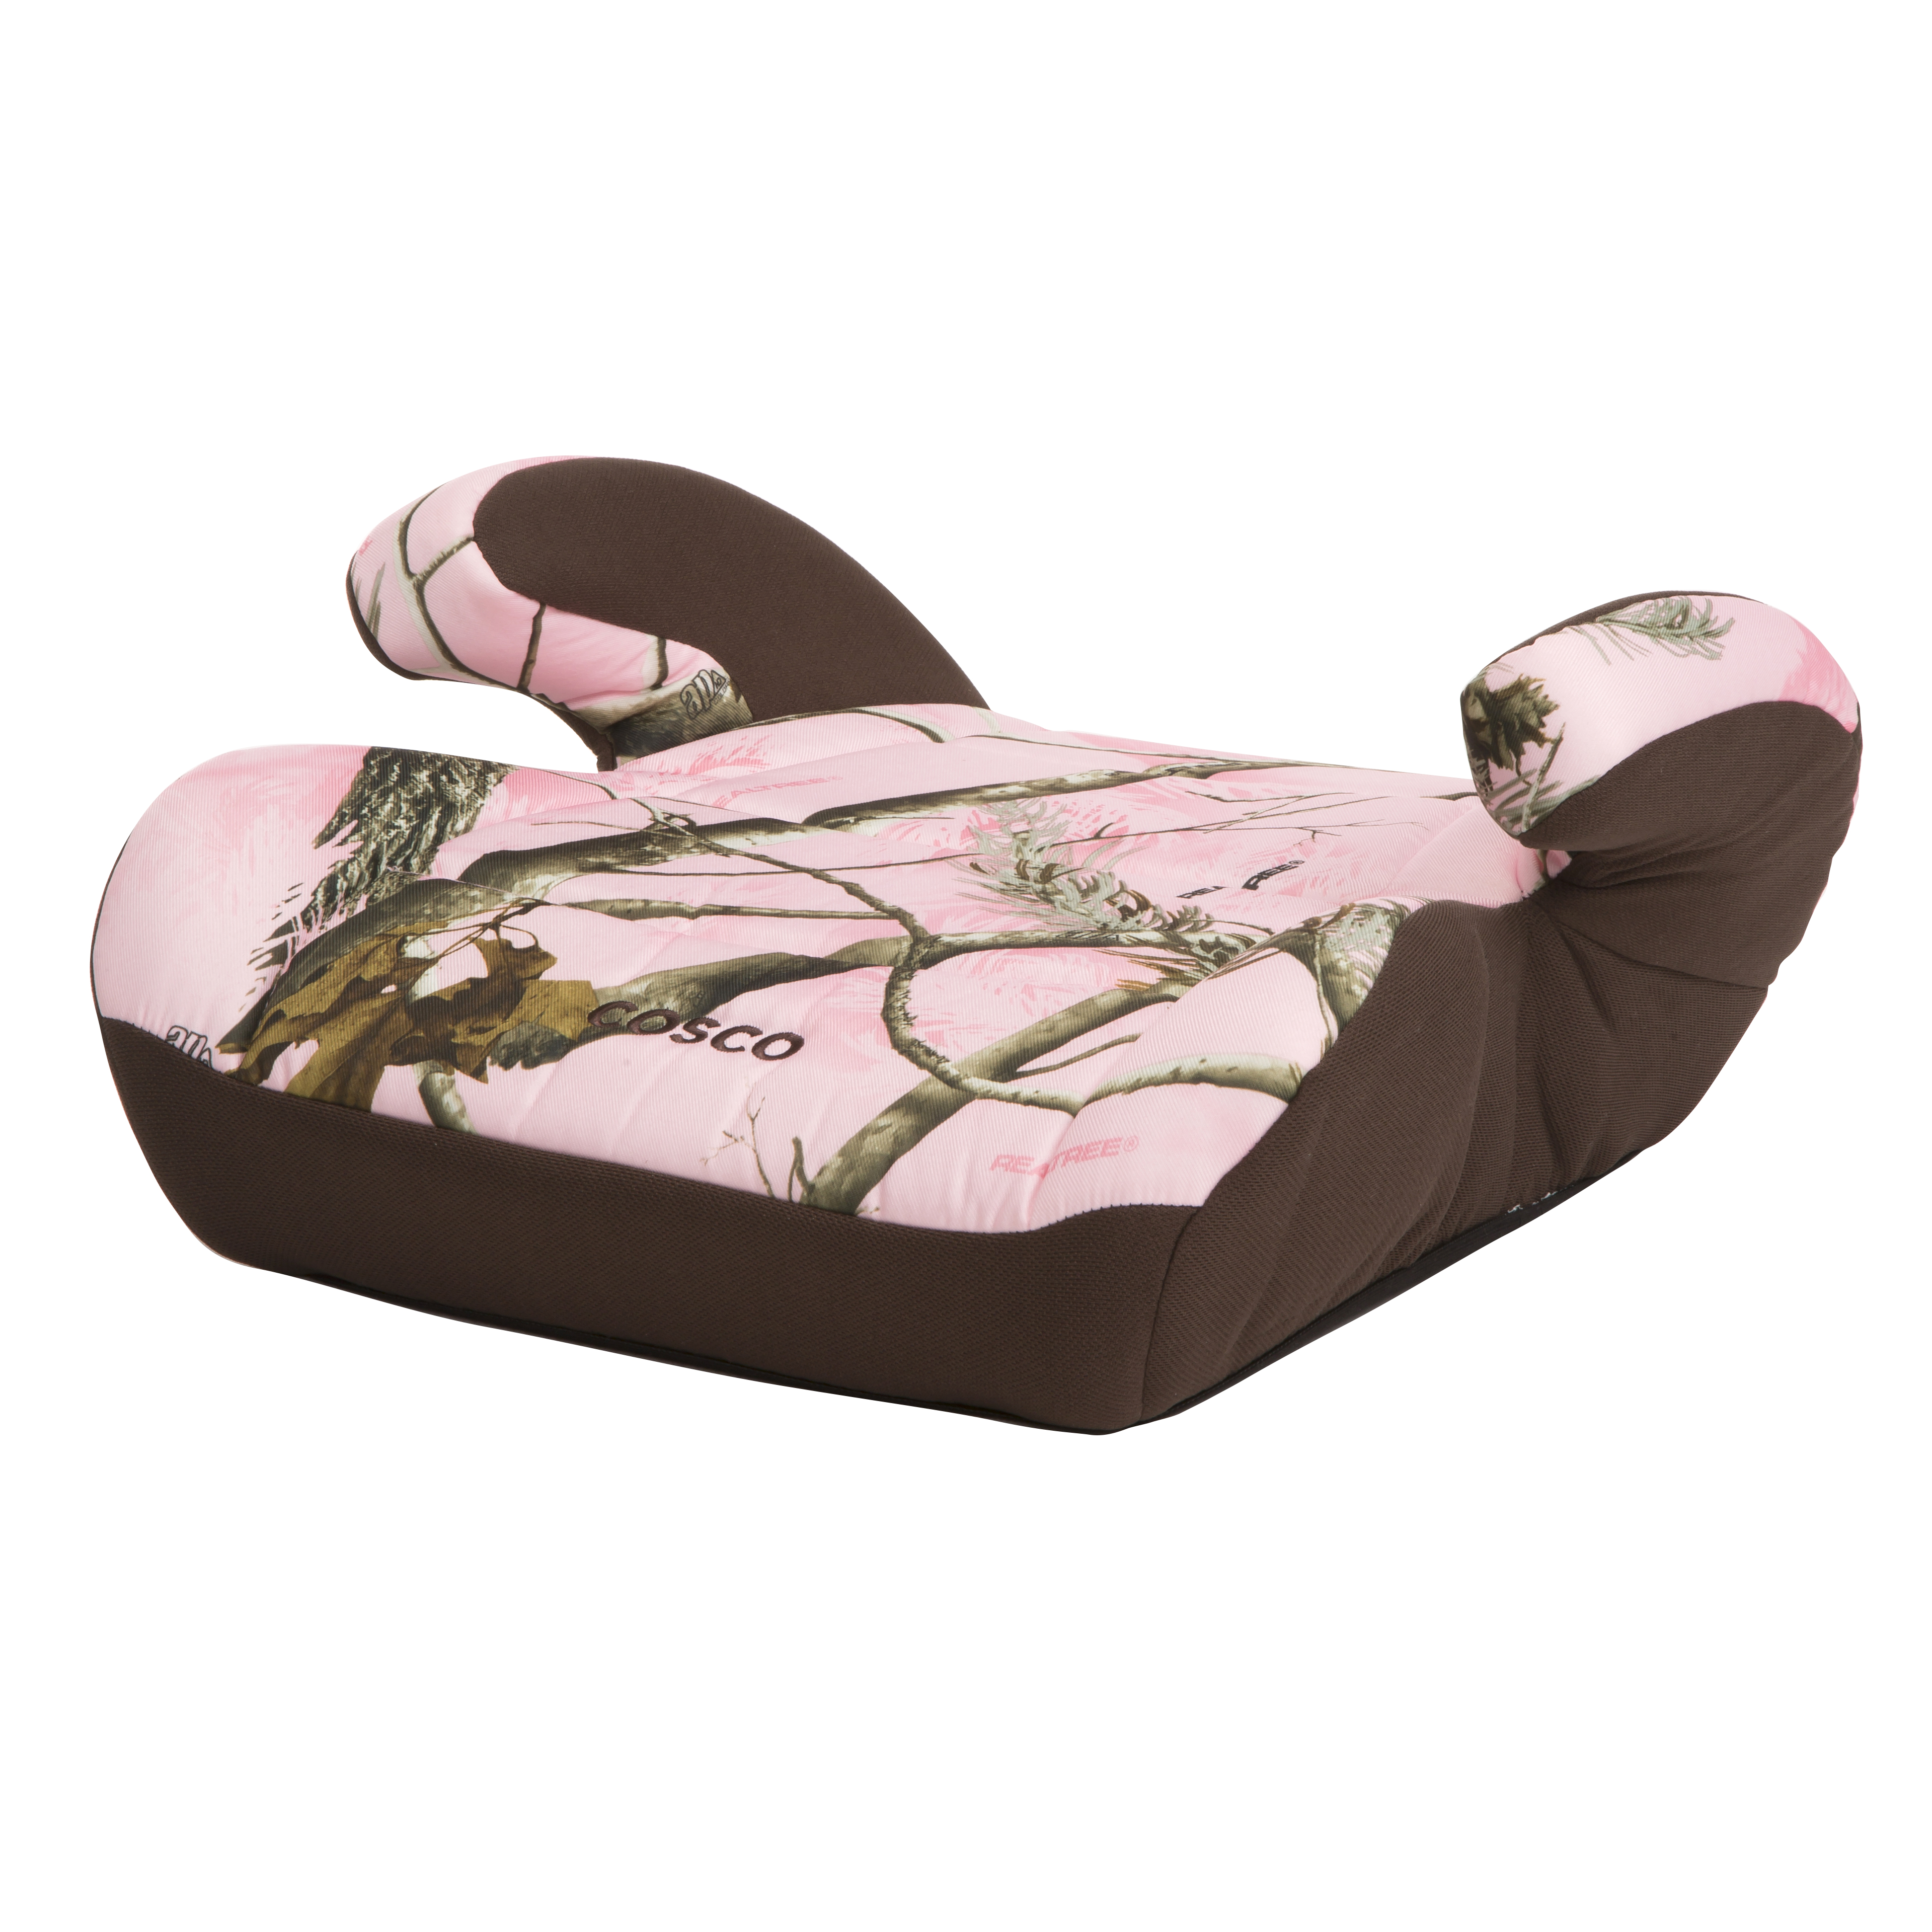 Cosco Top Side Booster Car Seat -Realtree Pink